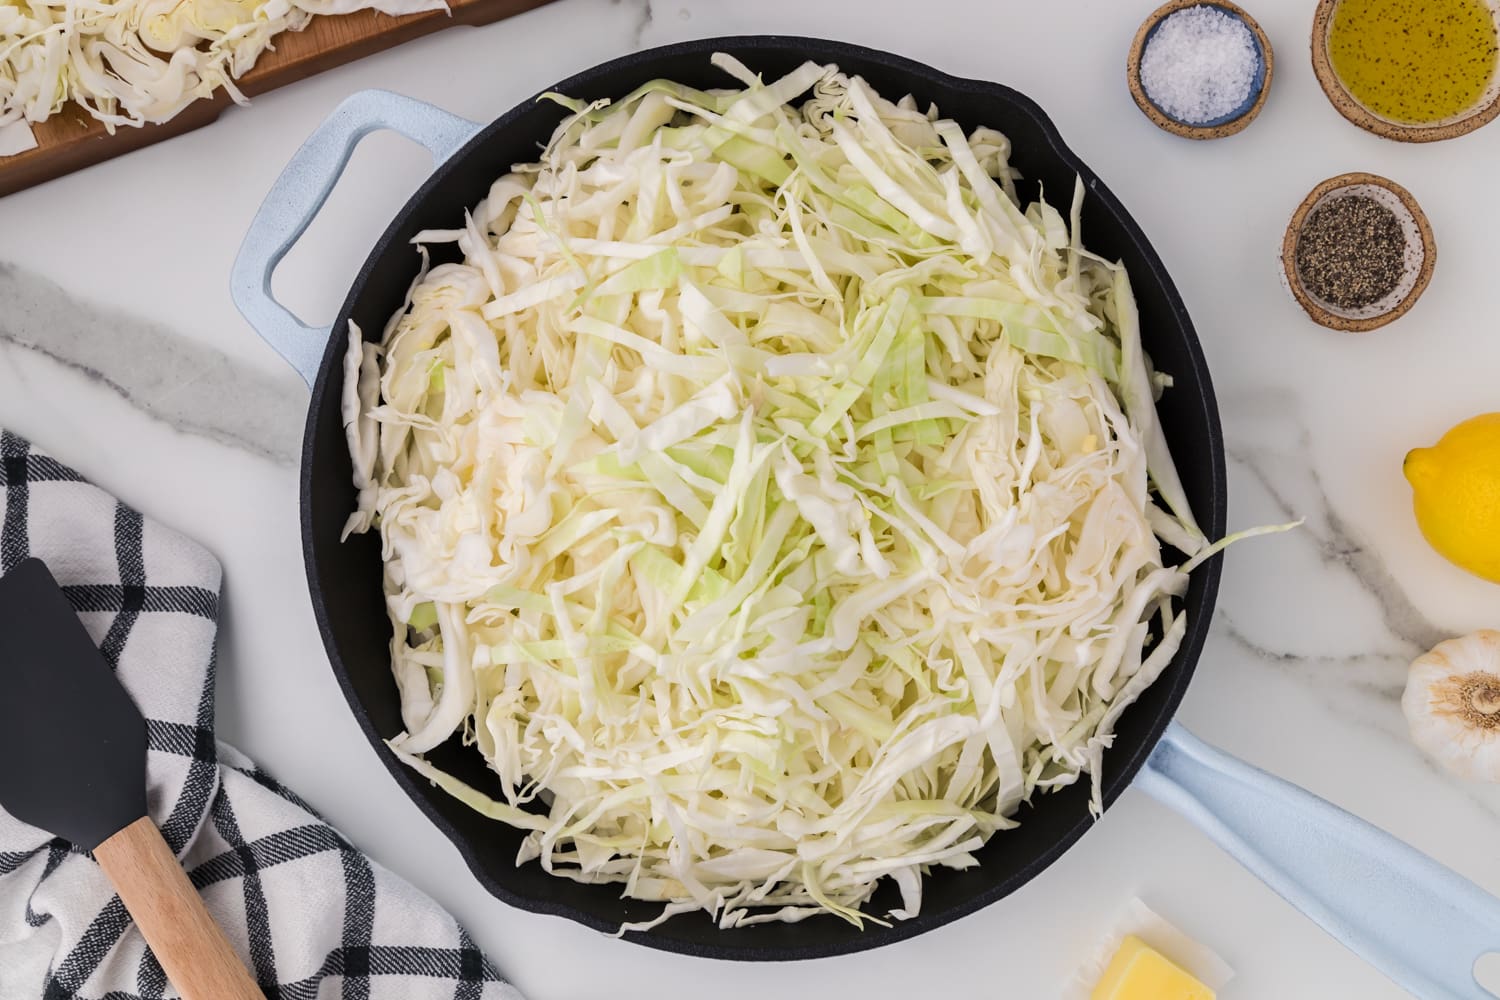 Uncooked cabbage in pan.